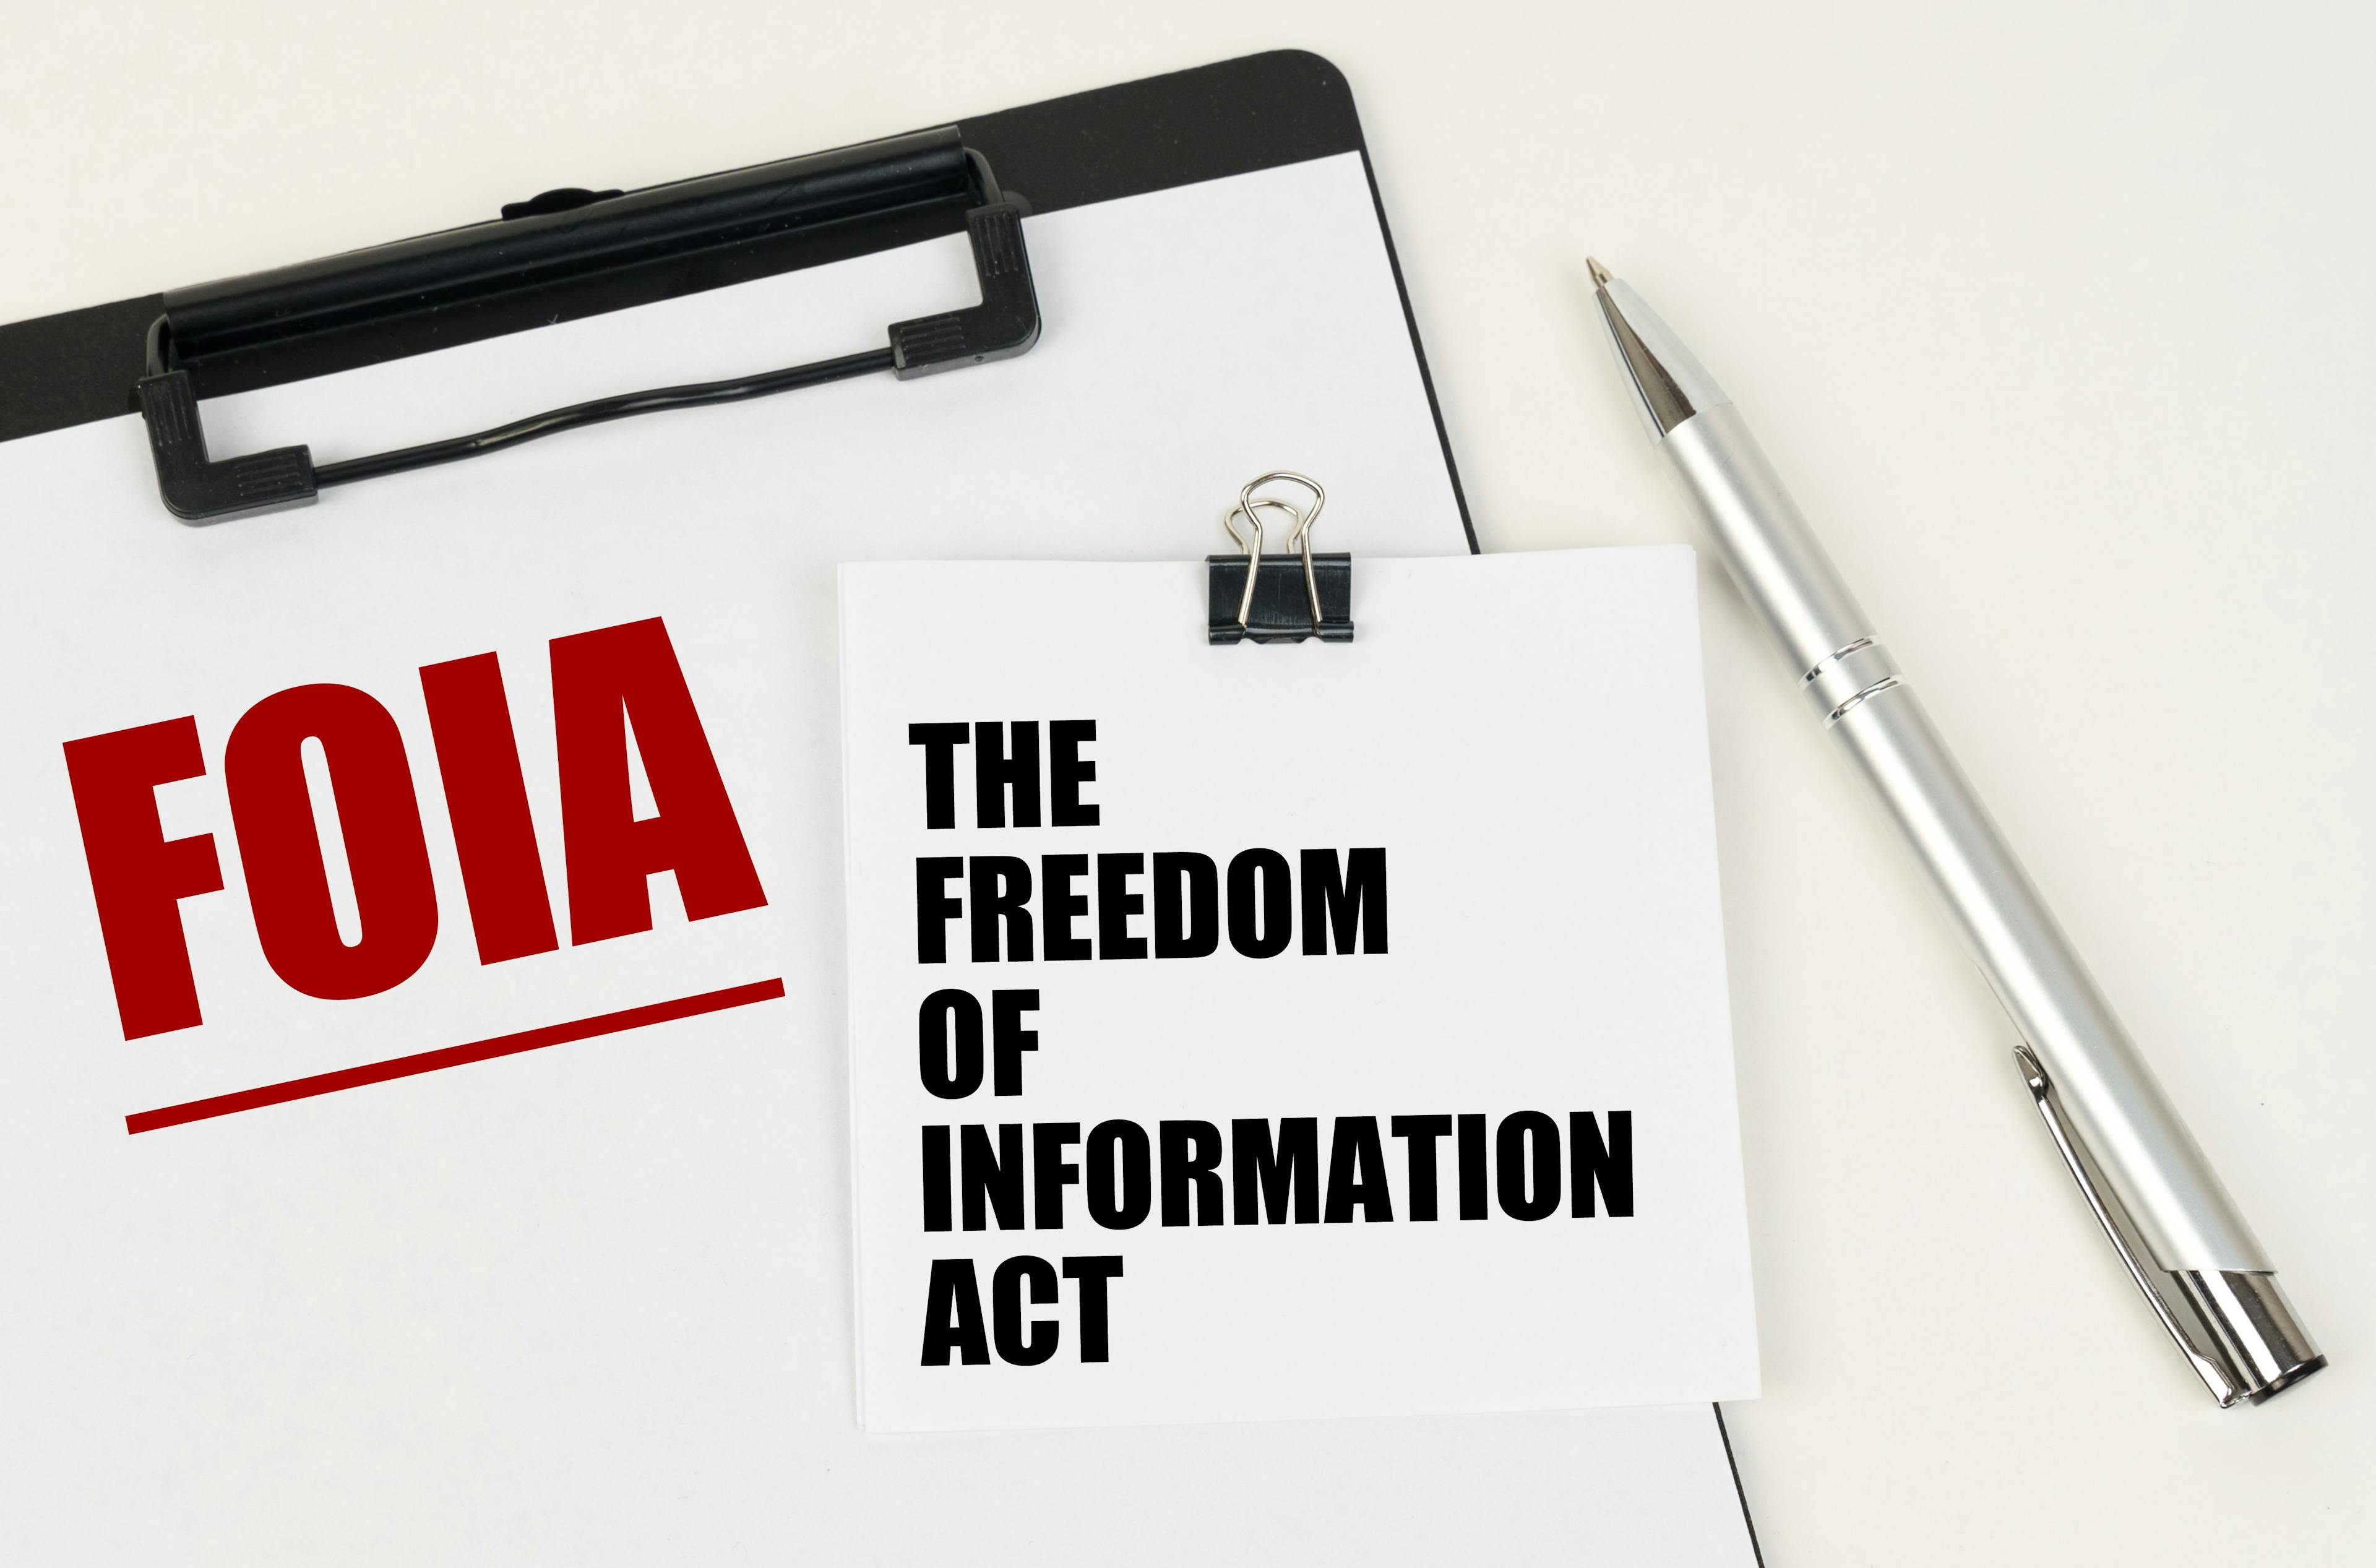 On the tablet, a sheet of paper and stickers with the inscription - FOIA, THE FREEDOM OF INFORMATION ACT | Image Credit: Dzmitry - stock.adobe.com